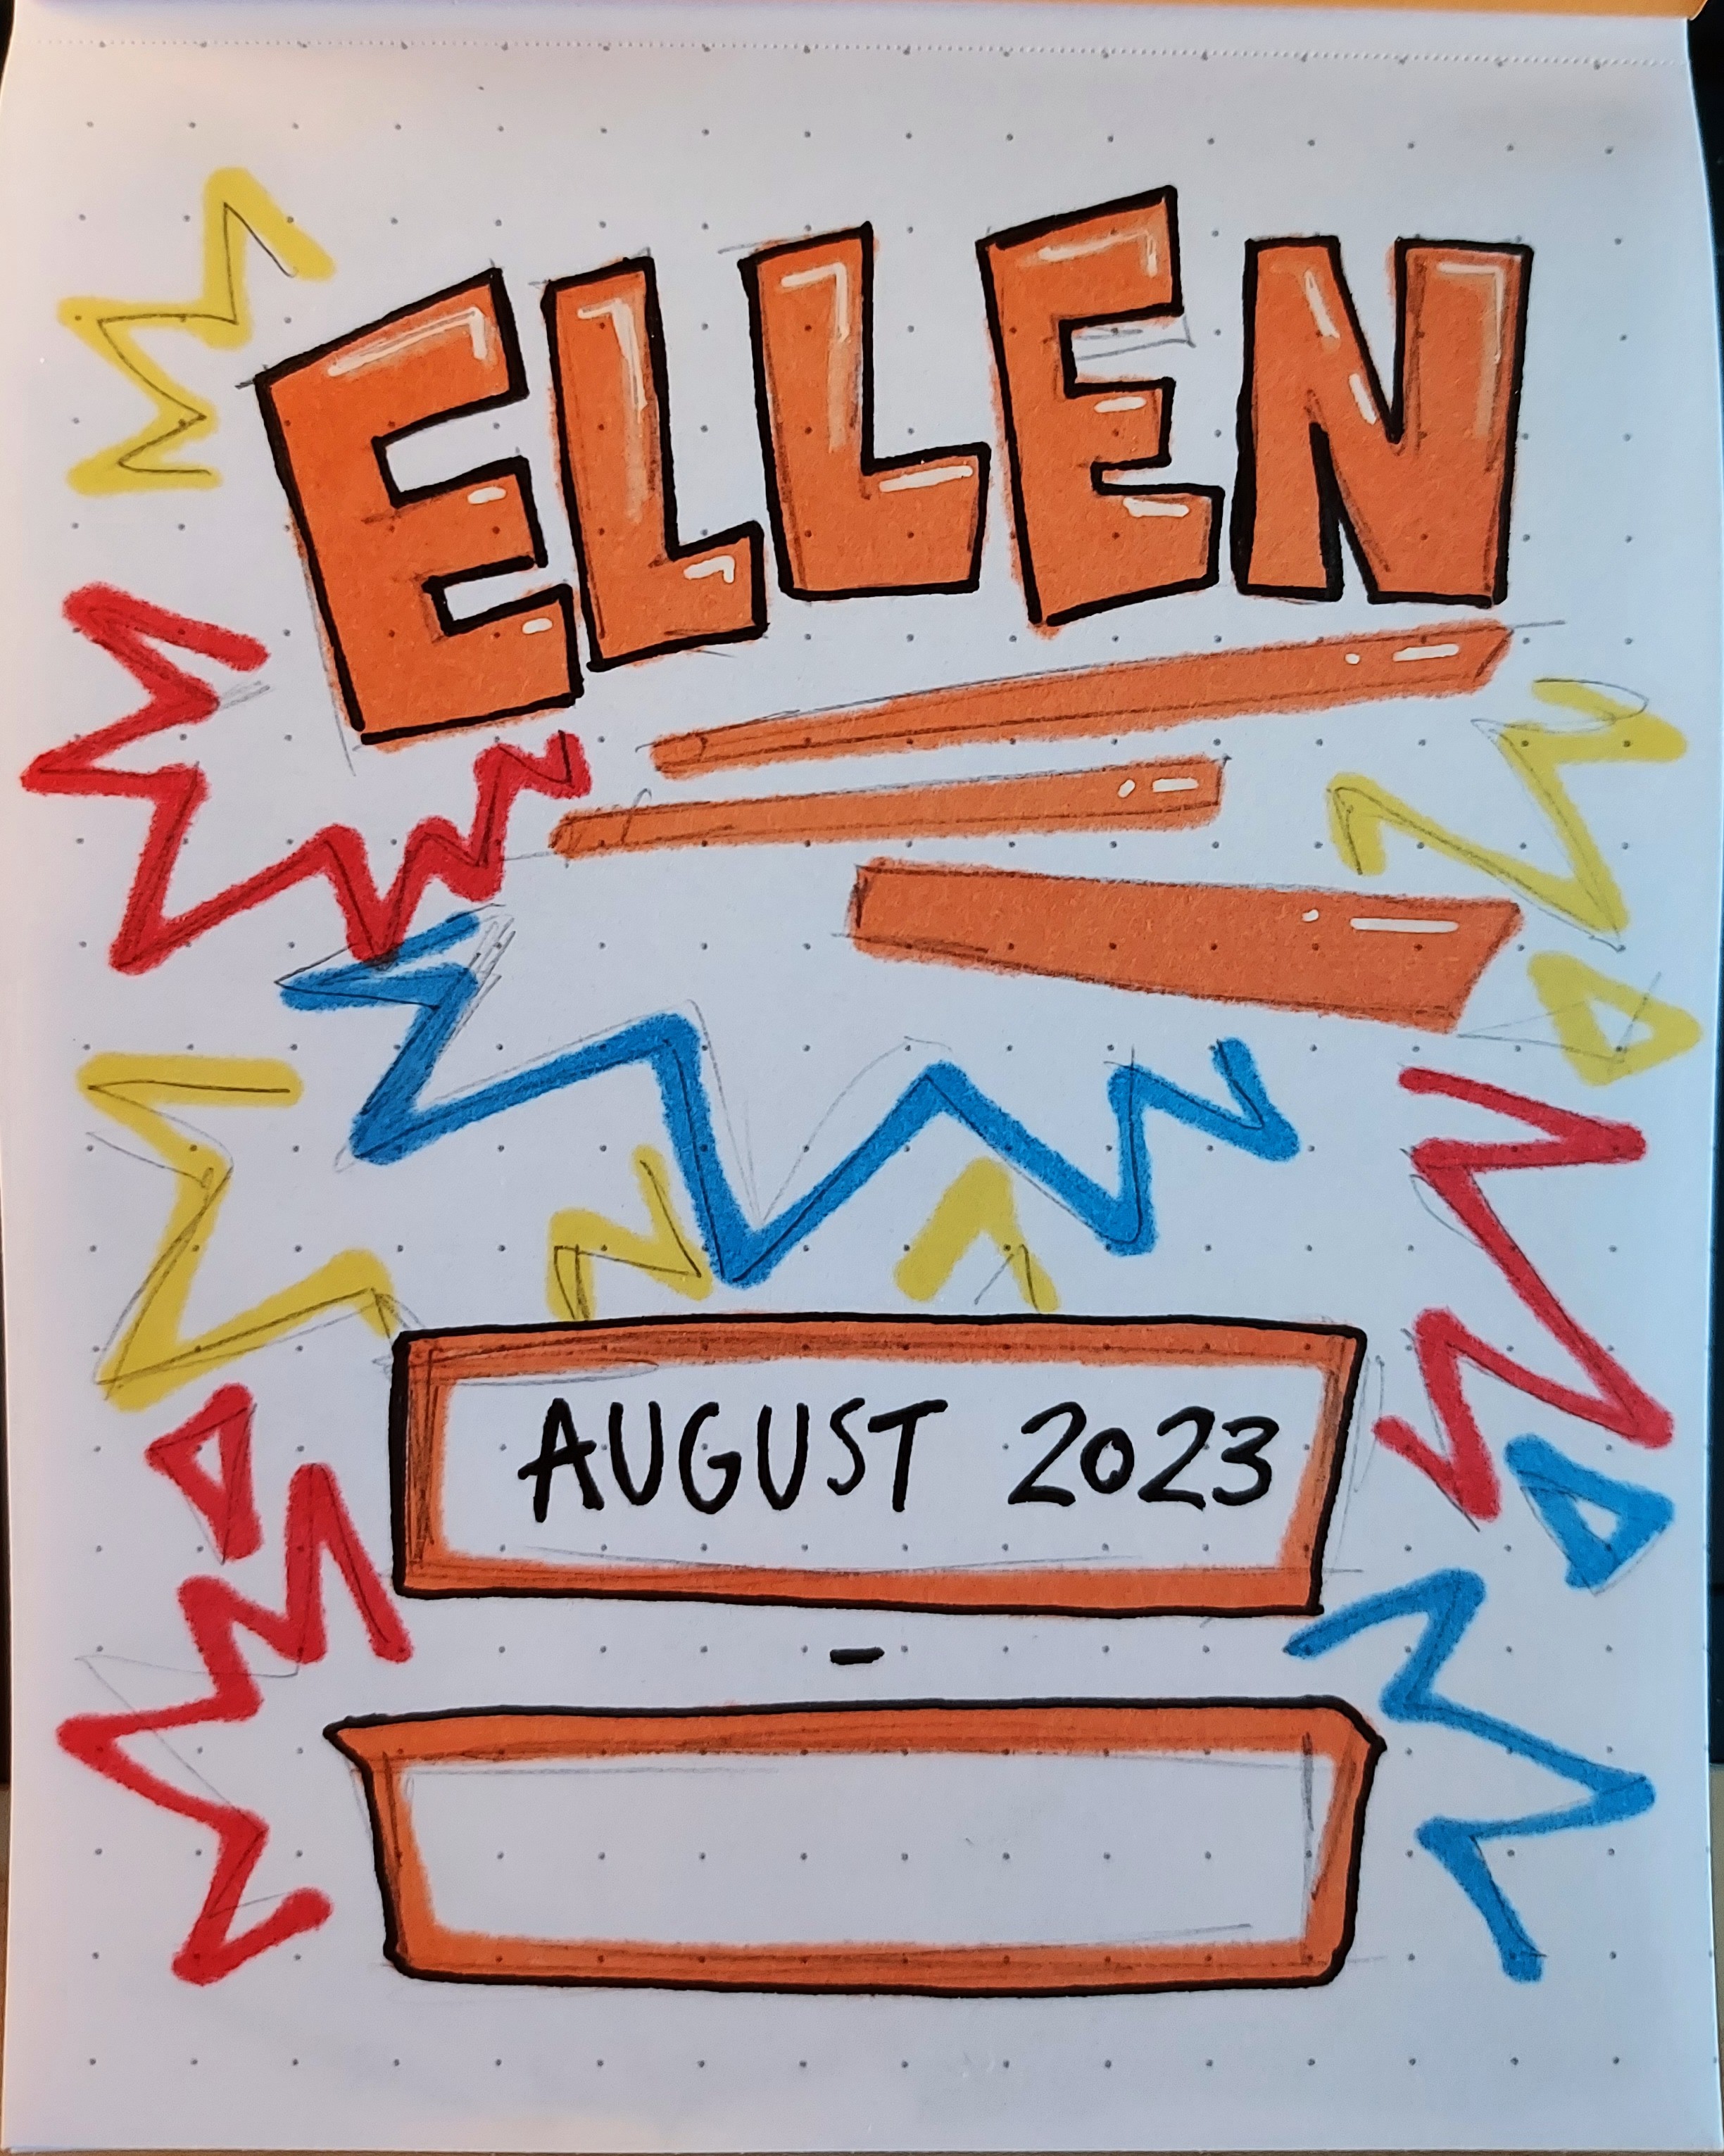 Page 1: A title page, reading 'Ellen' in block orange letters. It's decorated with jagged explosion lines in primary colors, and two narrow boxes at the bottom are left for dates. The top reads 'August 2023' and the bottom is left blank.